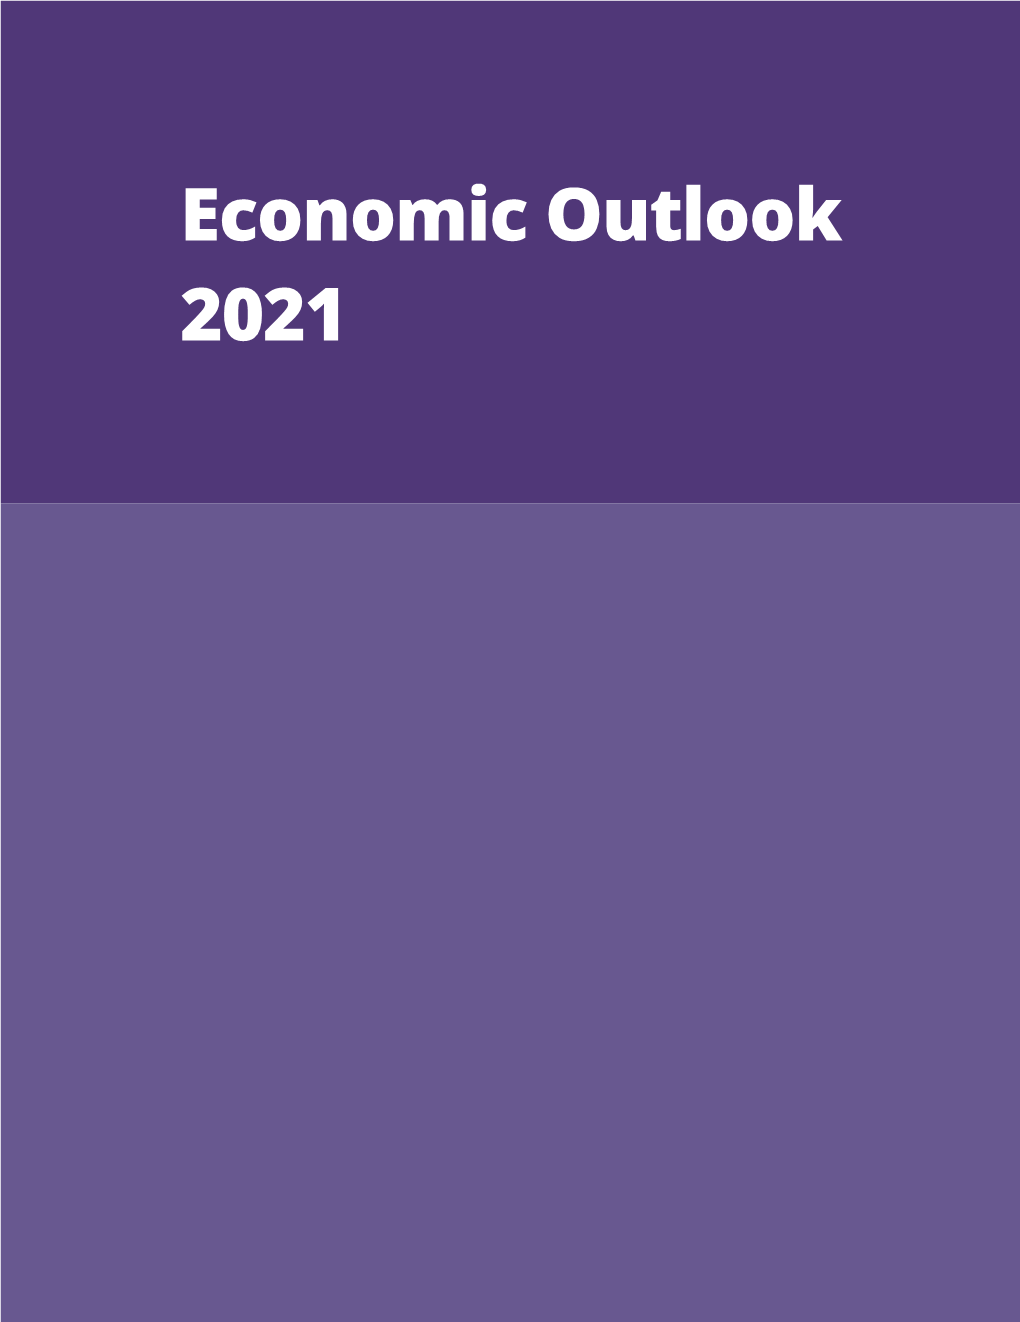 Economic Outlook 2021 Copyright Reserved